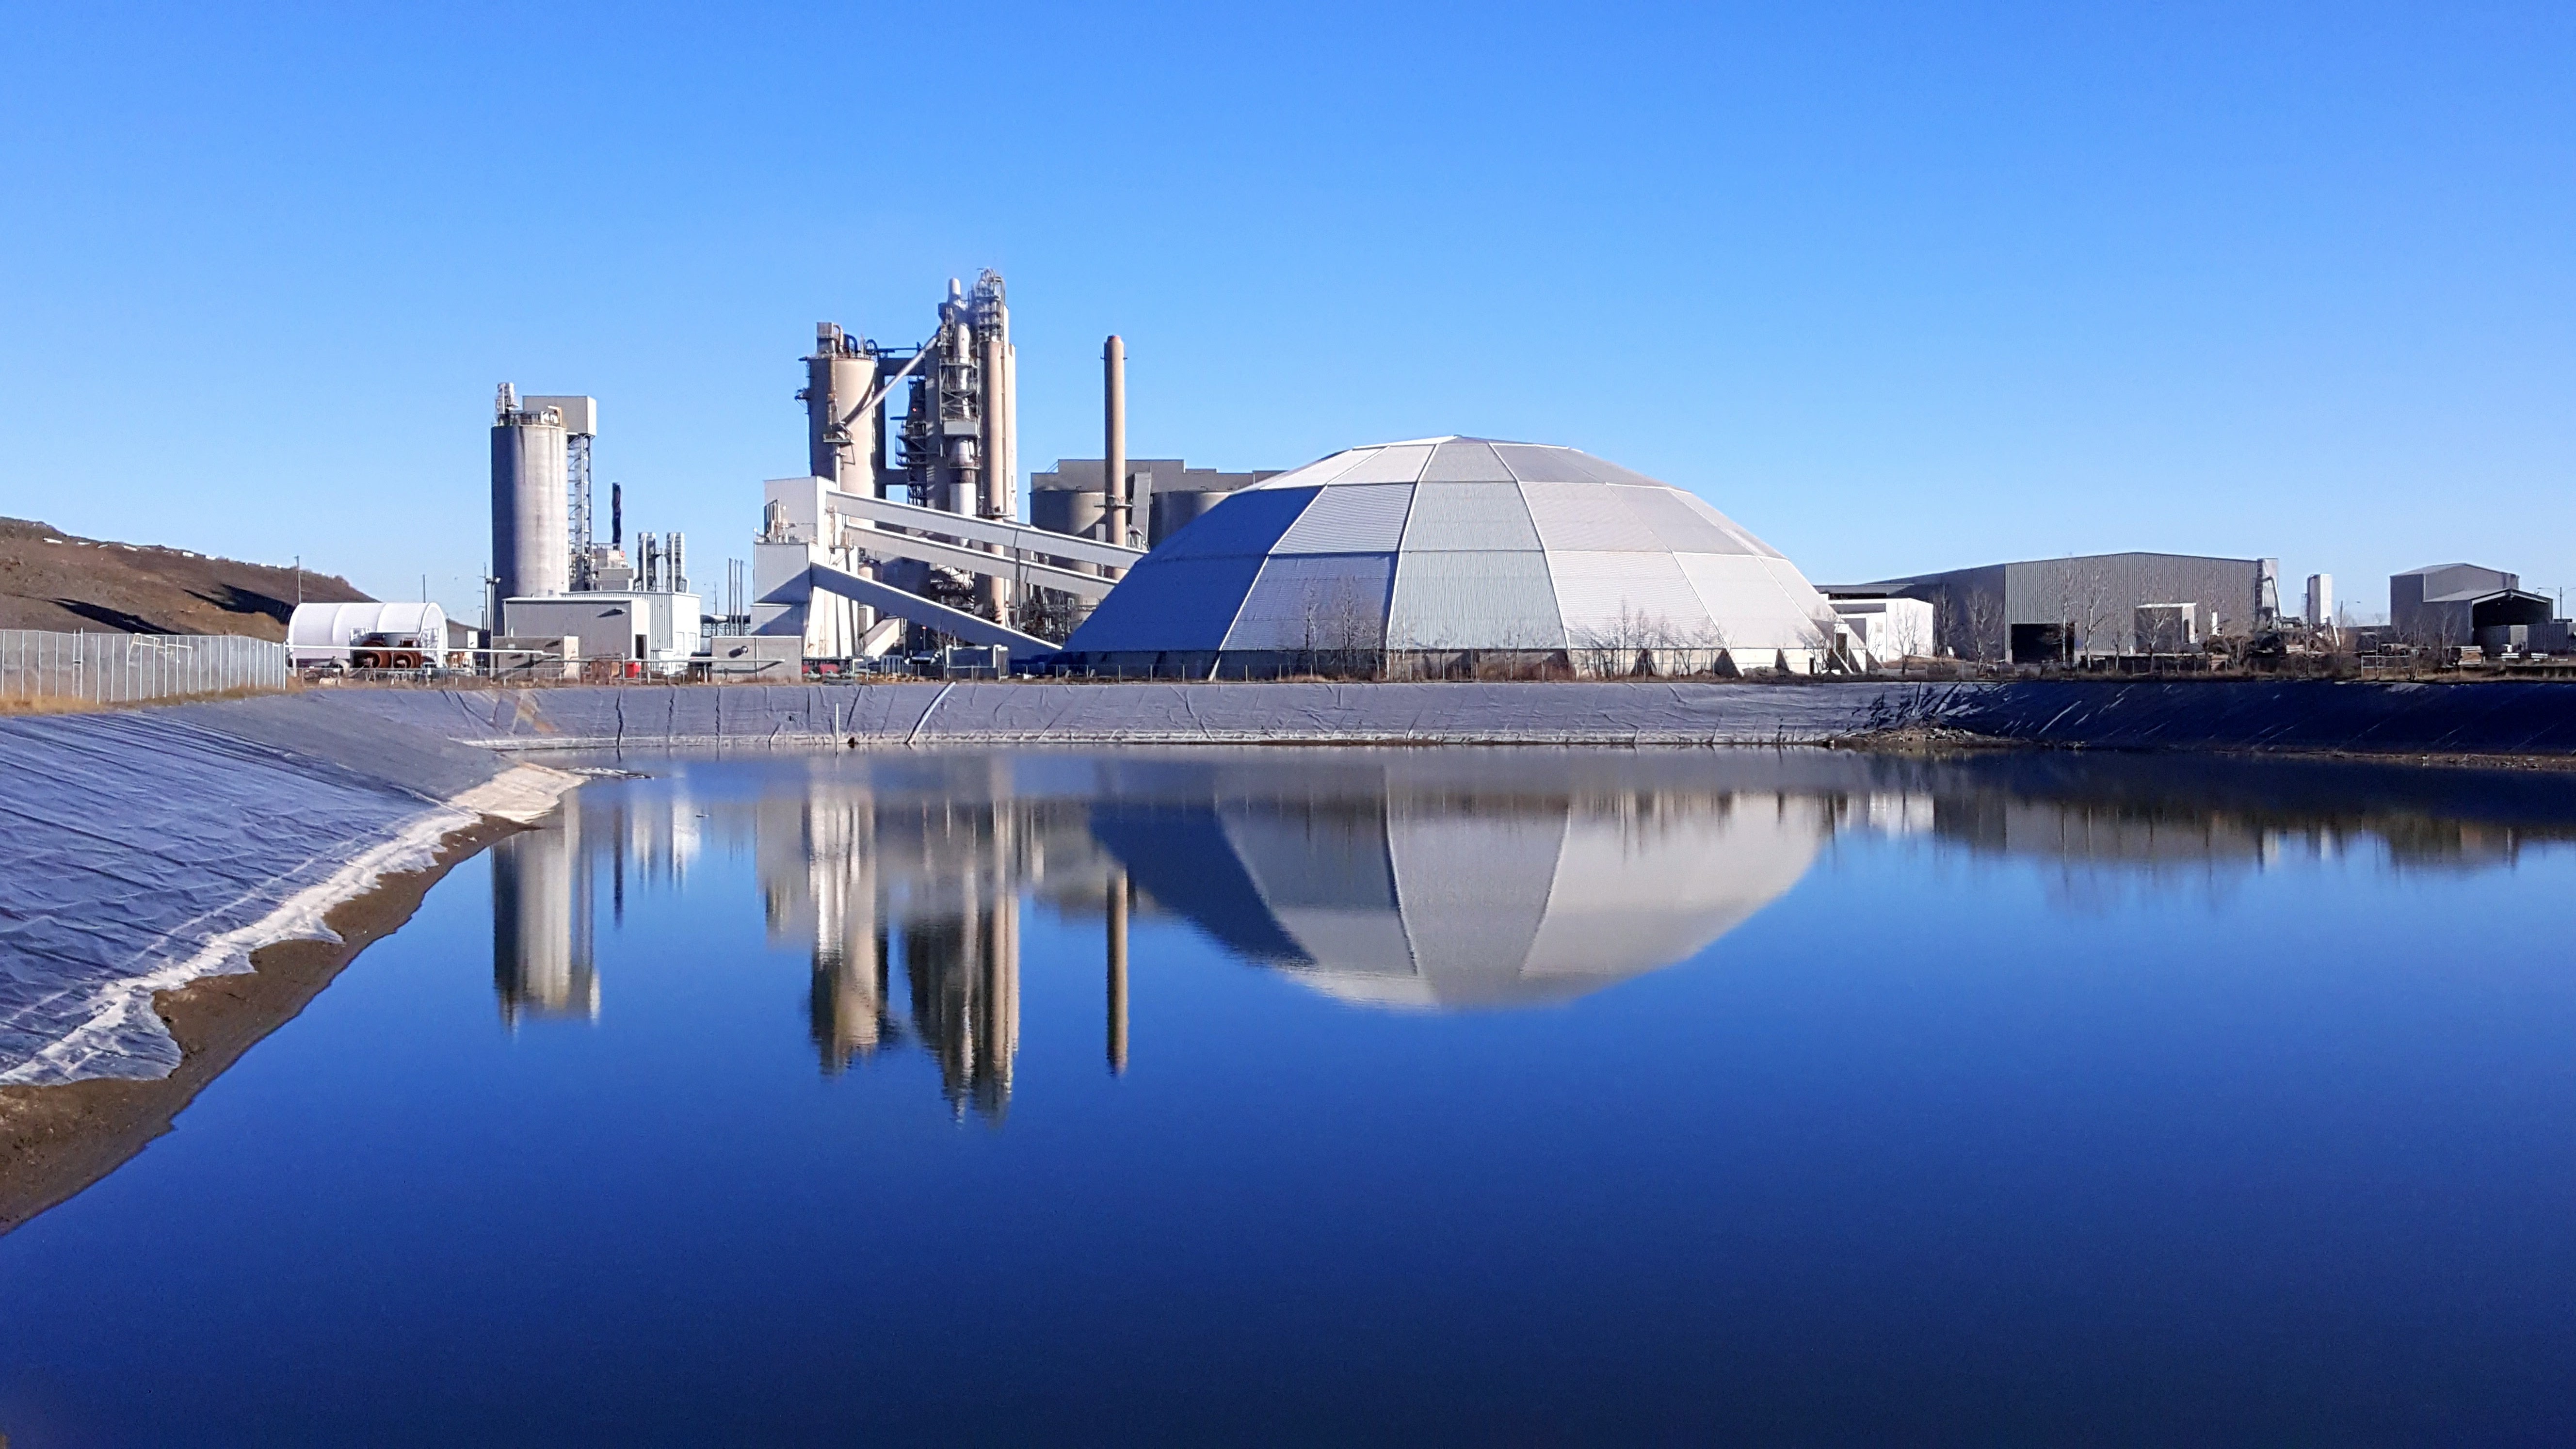 Heidelberg Materials North America will be commissioning the world’s first net-zero cement plant at its Edmonton location by adding CCUS technology to an already state-of-the-art facility.